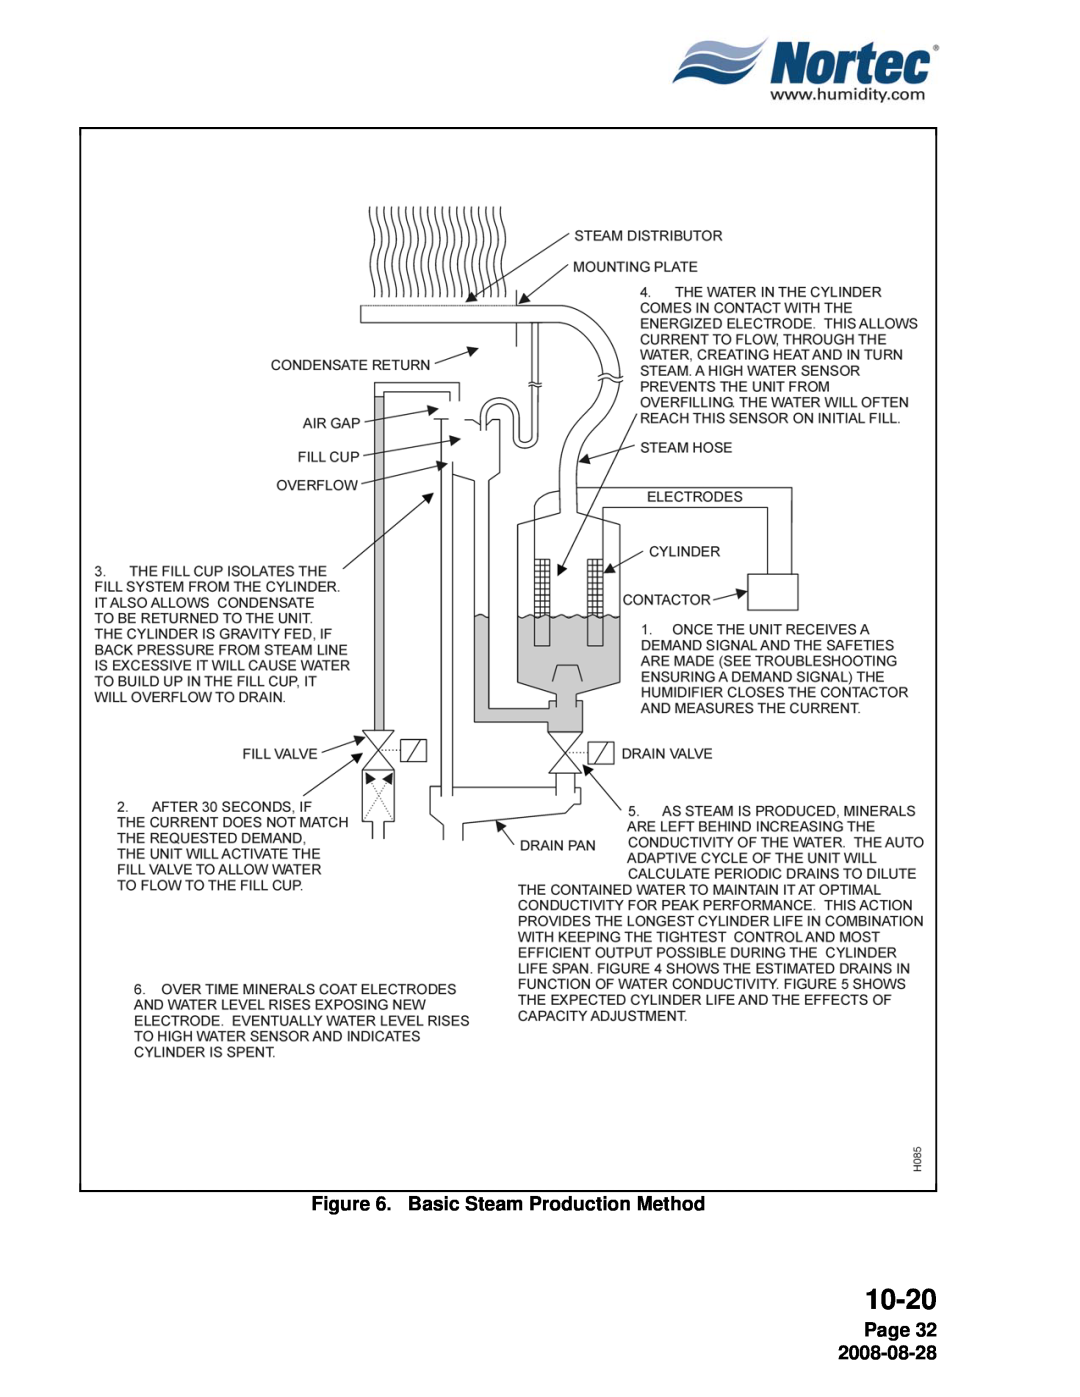 Nortec NH Series installation manual Basic Steam Production Method, Page 32, 10-20 